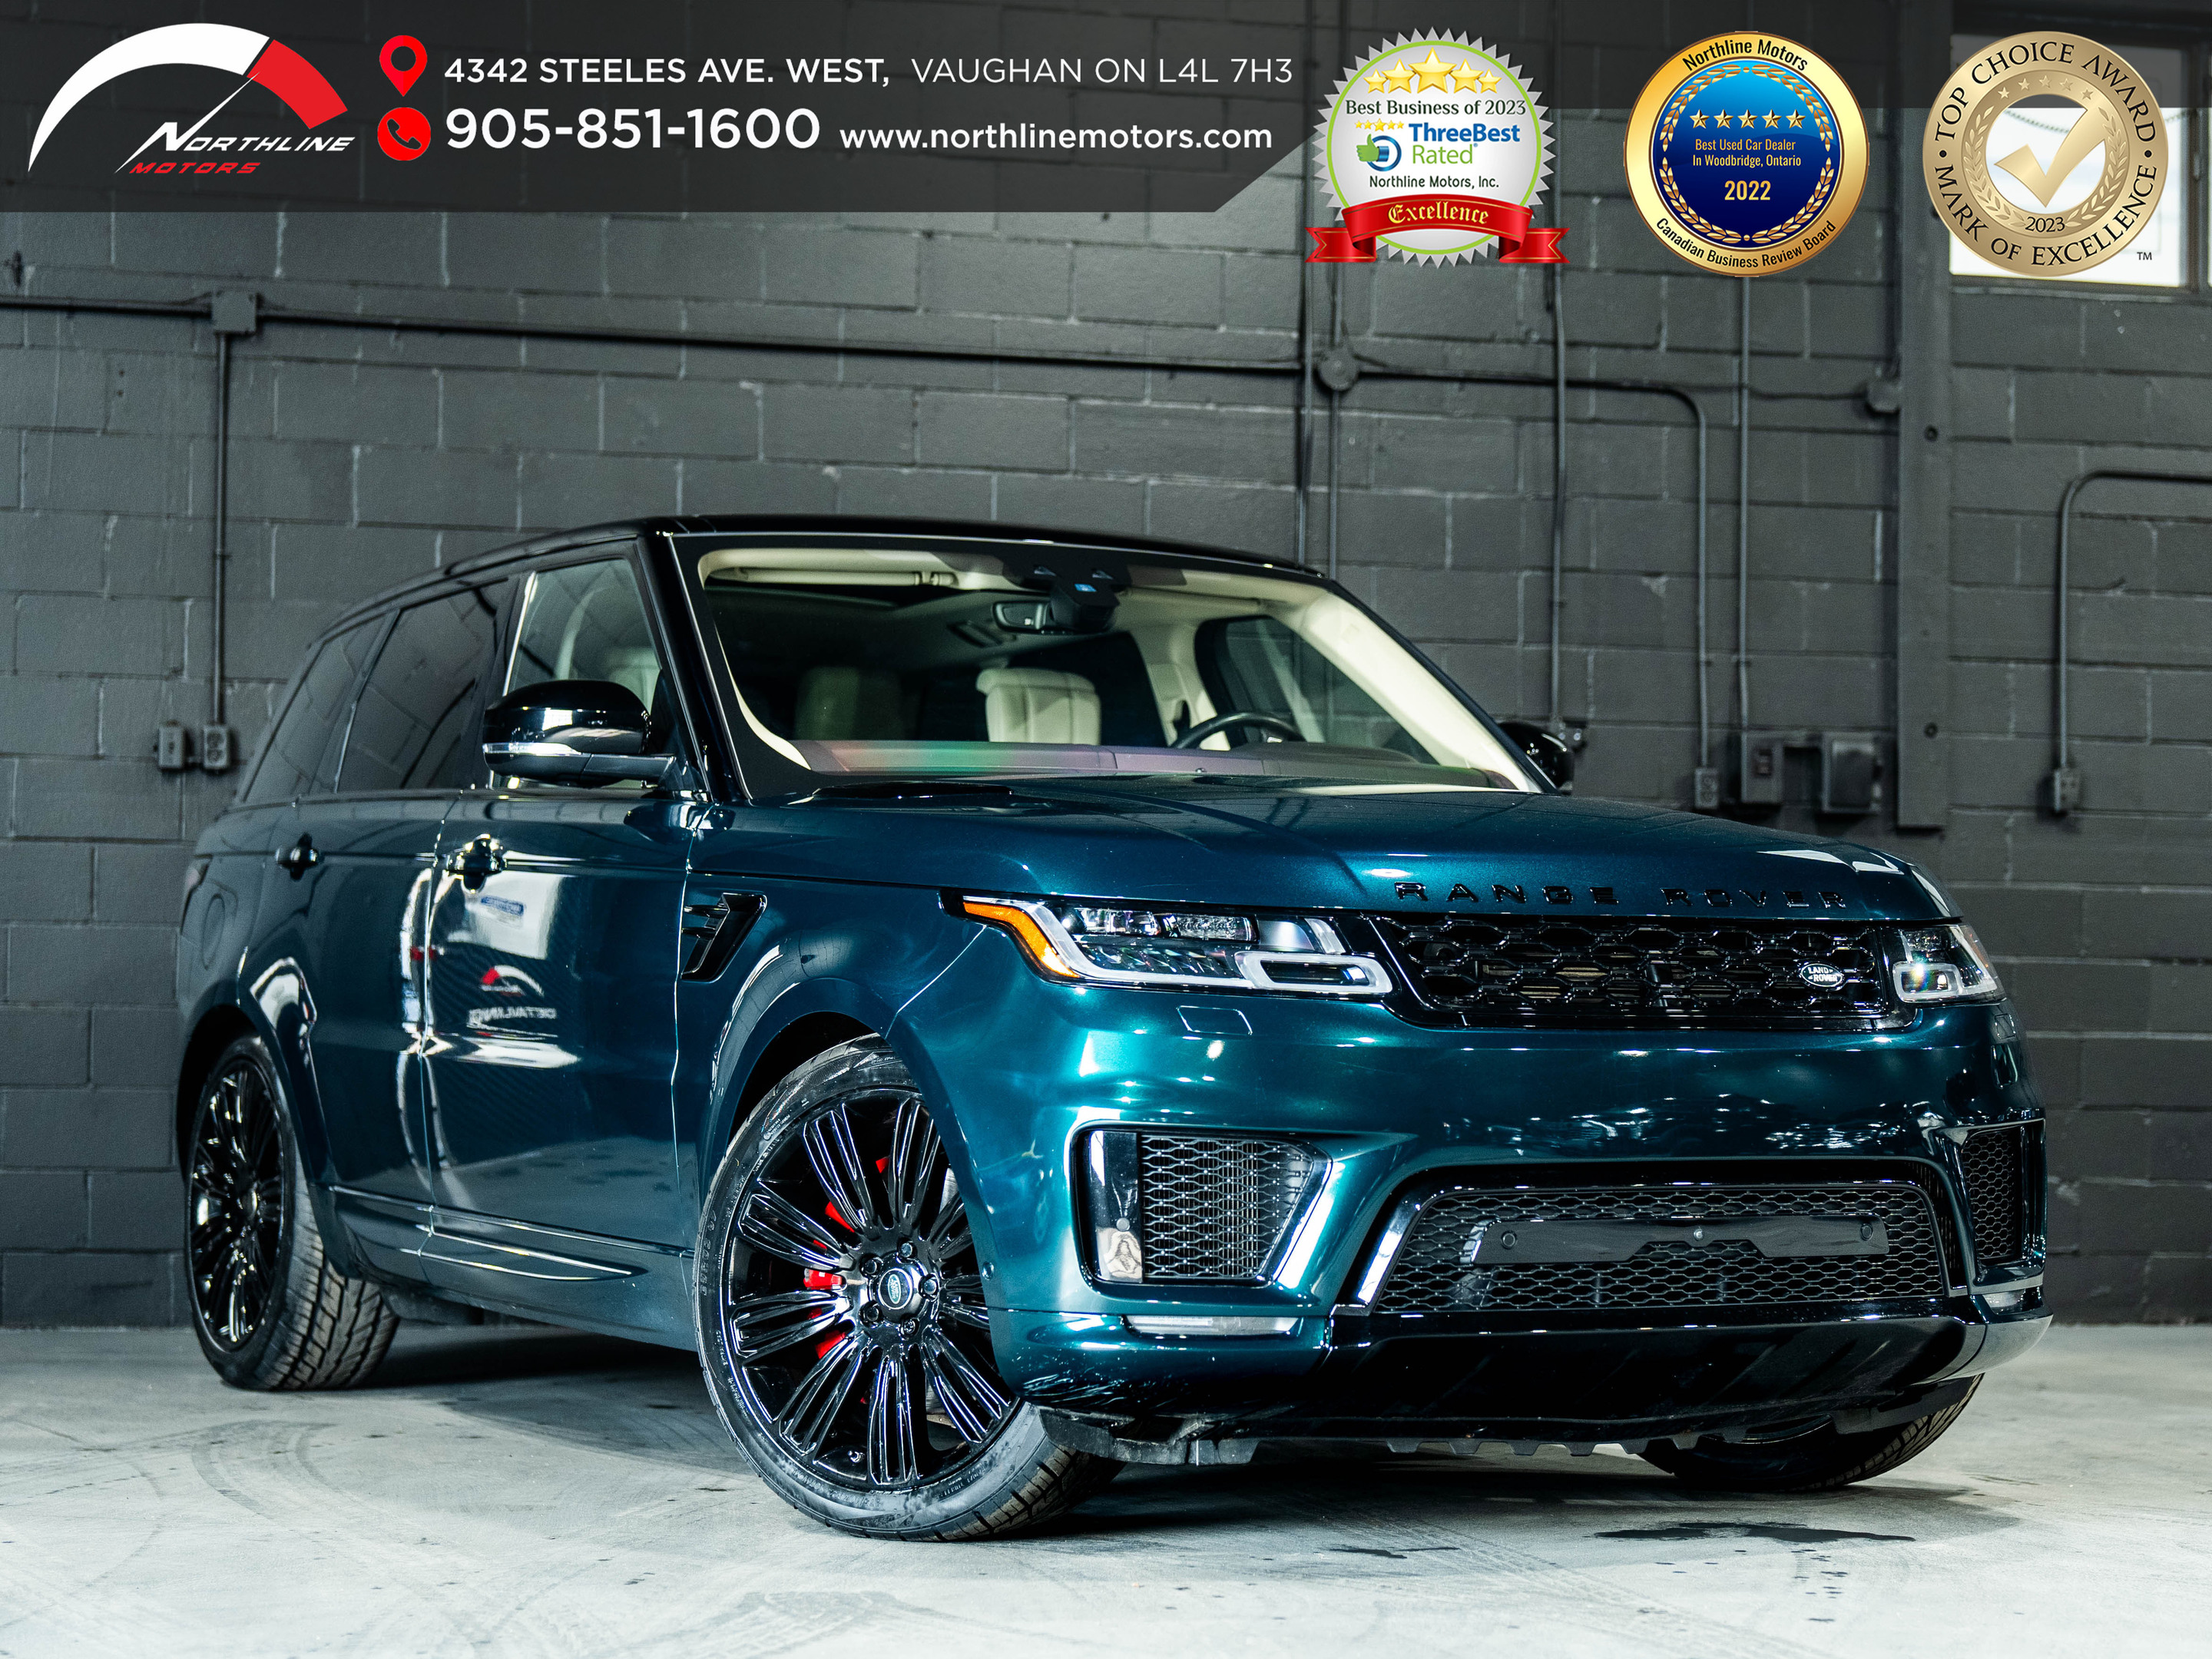 2020 Land Rover Range Rover Sport Autobiography/HUD/22 IN RIMS/360 CAM/PANO/MERIDIAN